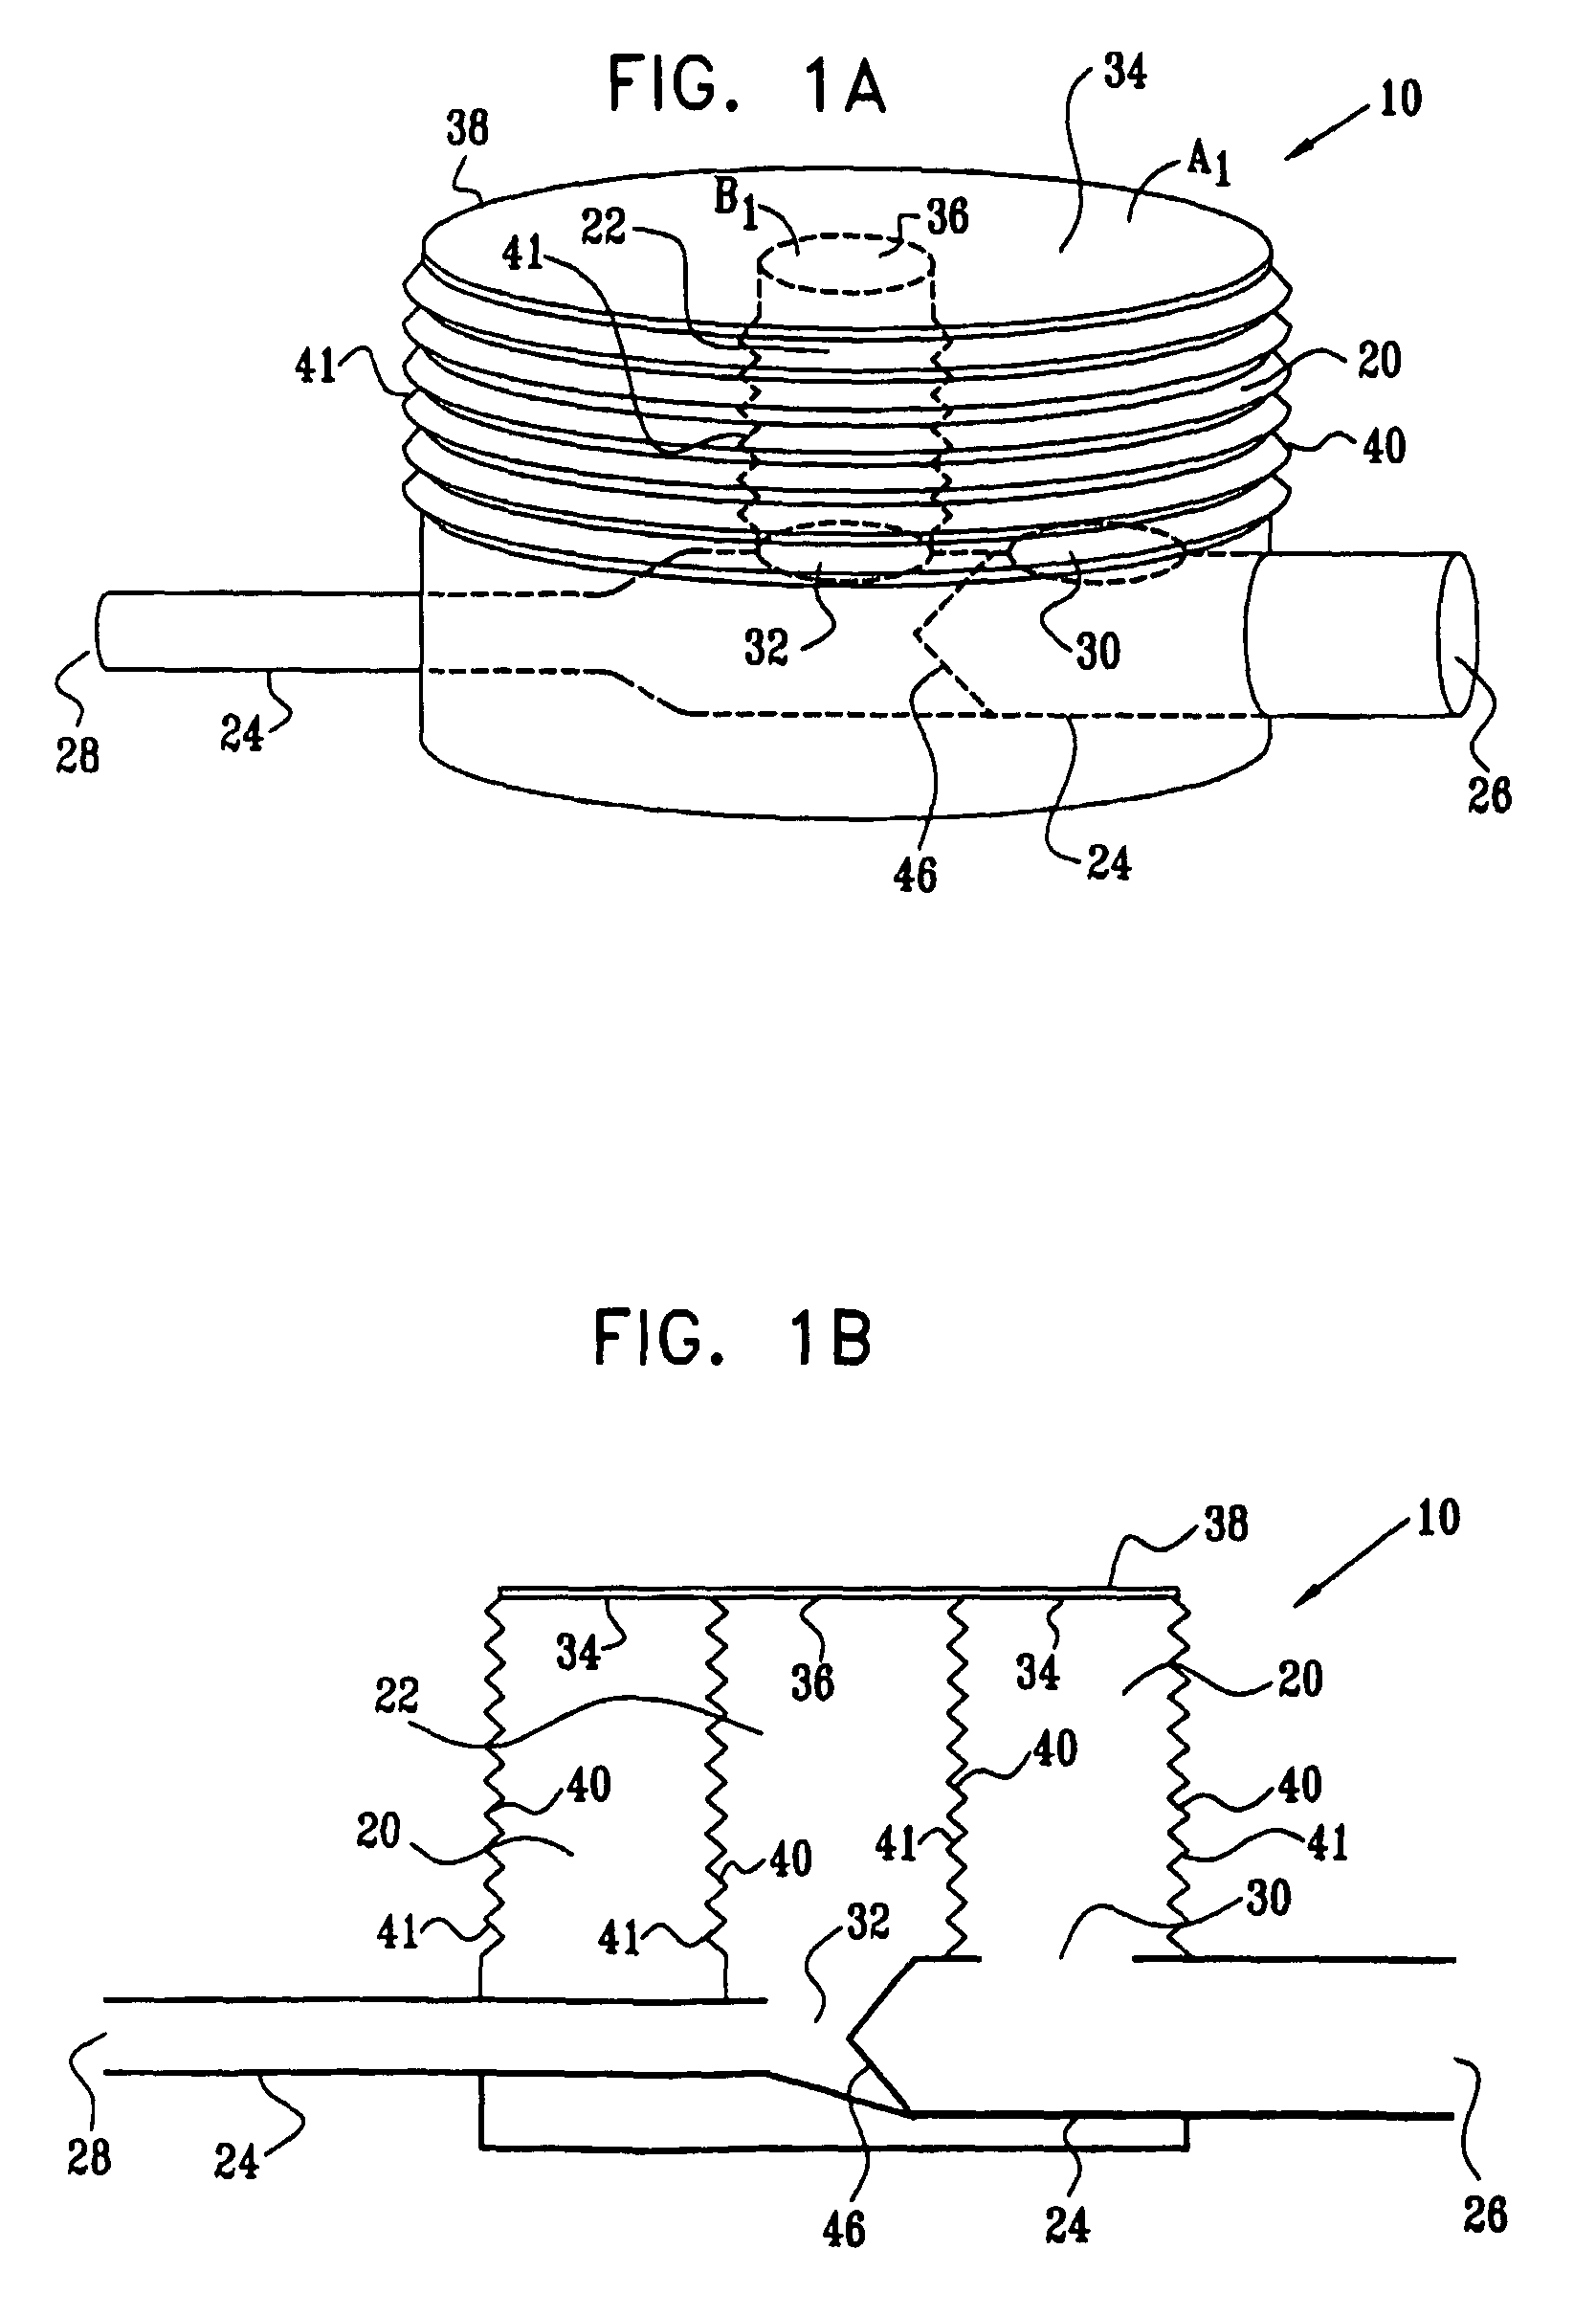 Extracardiac blood flow amplification device